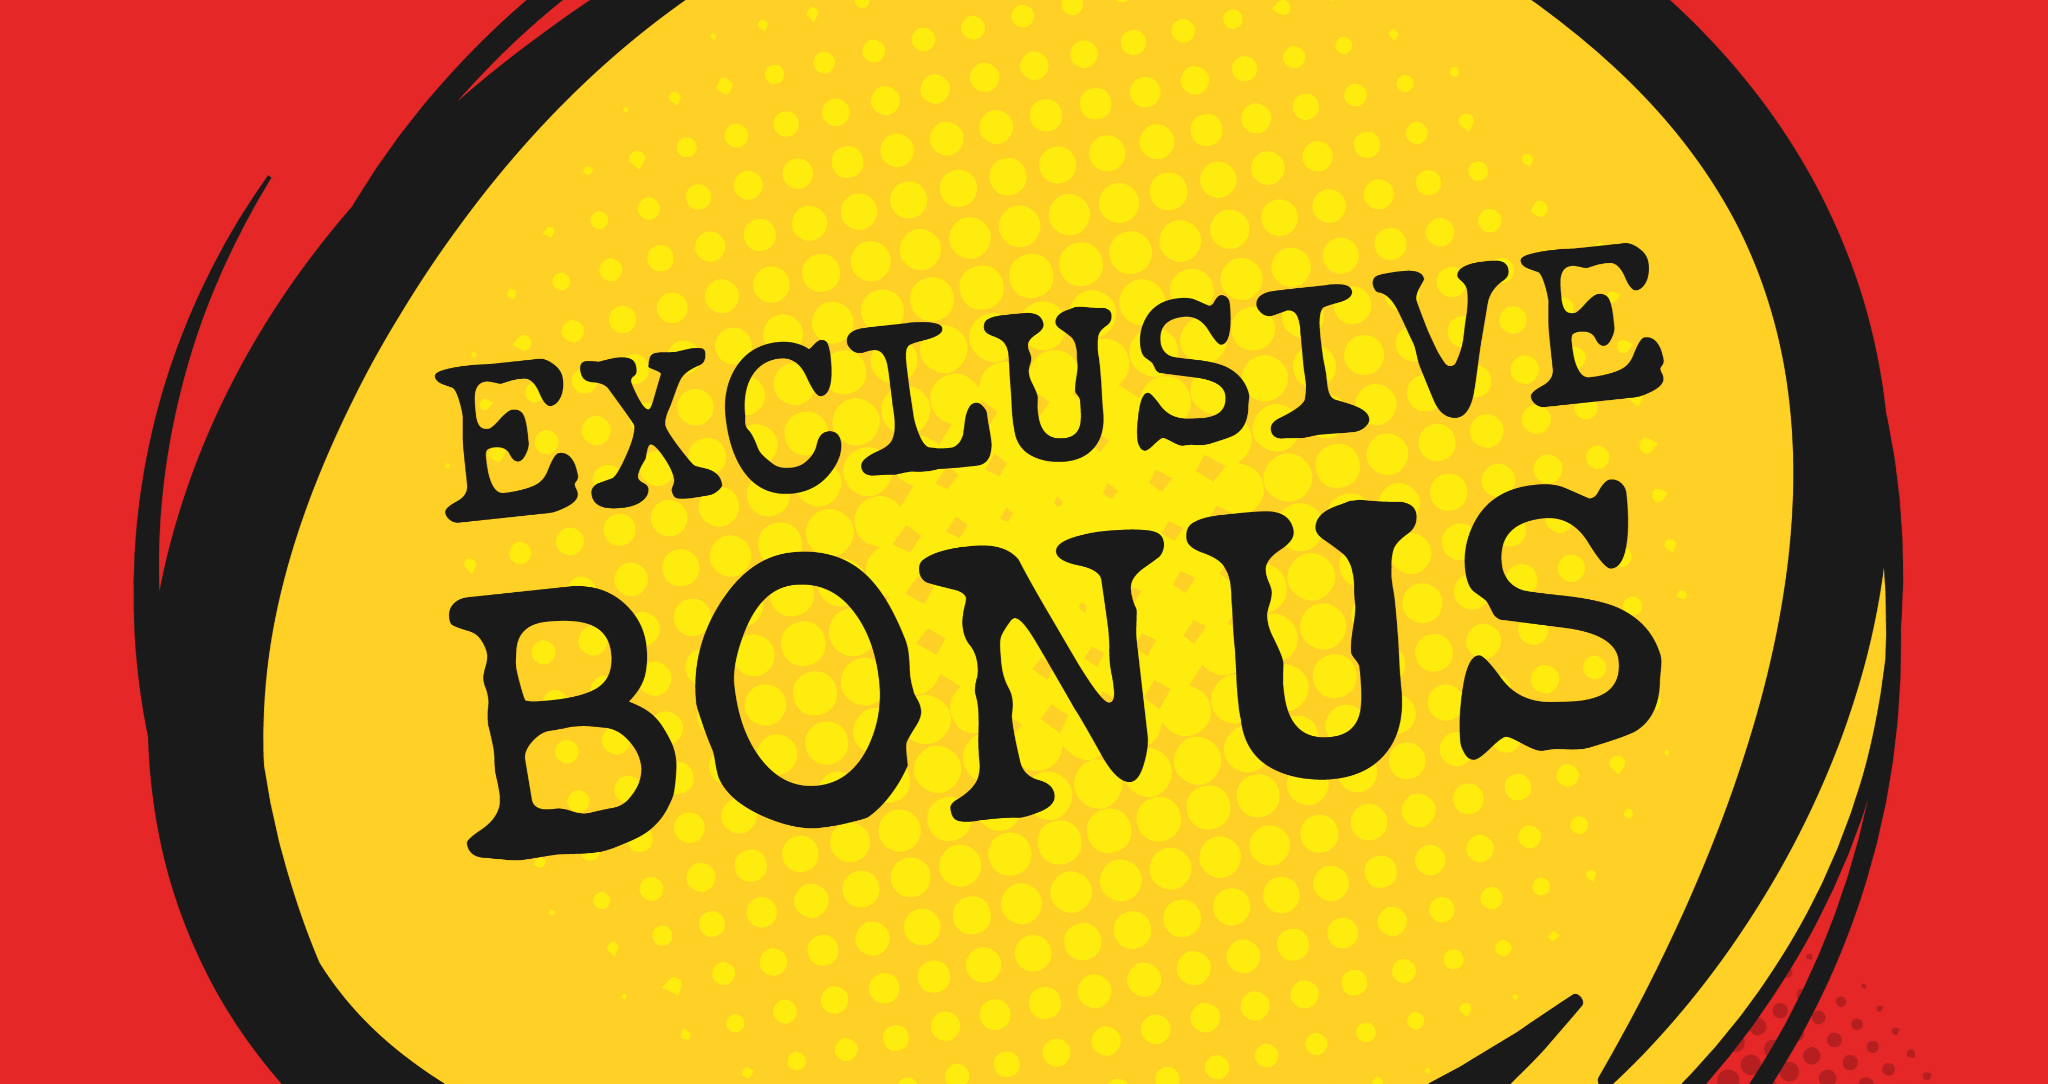 Which Type of Players Are Eligible to ‘Exclusive’ Casino Bonuses?